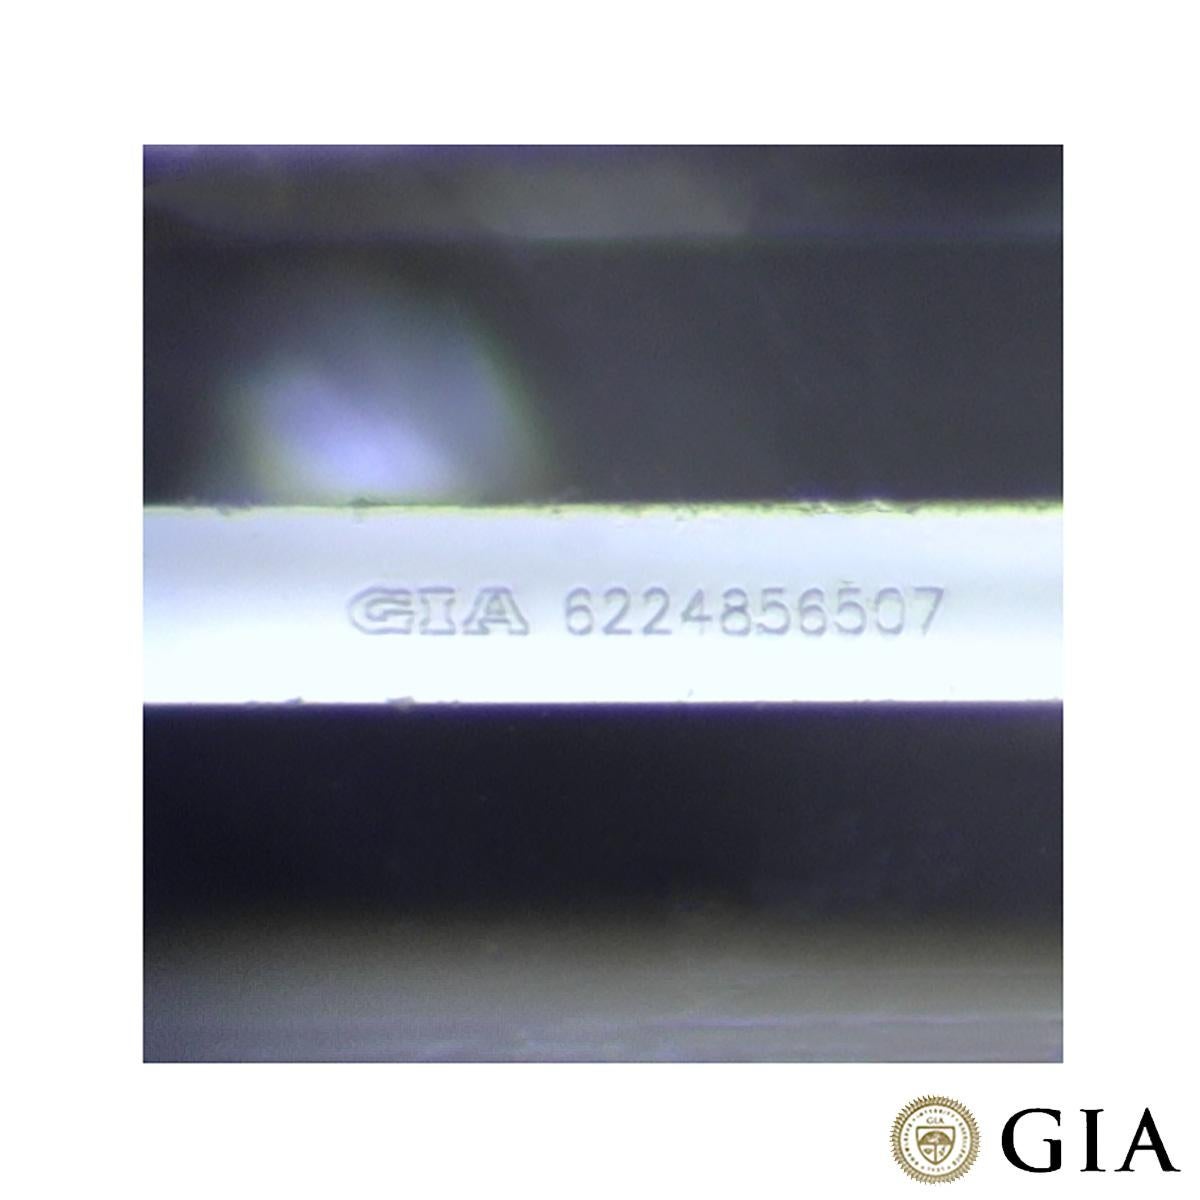 Gia Certified White Gold Emerald Cut Diamond Ring 0.59 Carat D/VS1 For Sale 1